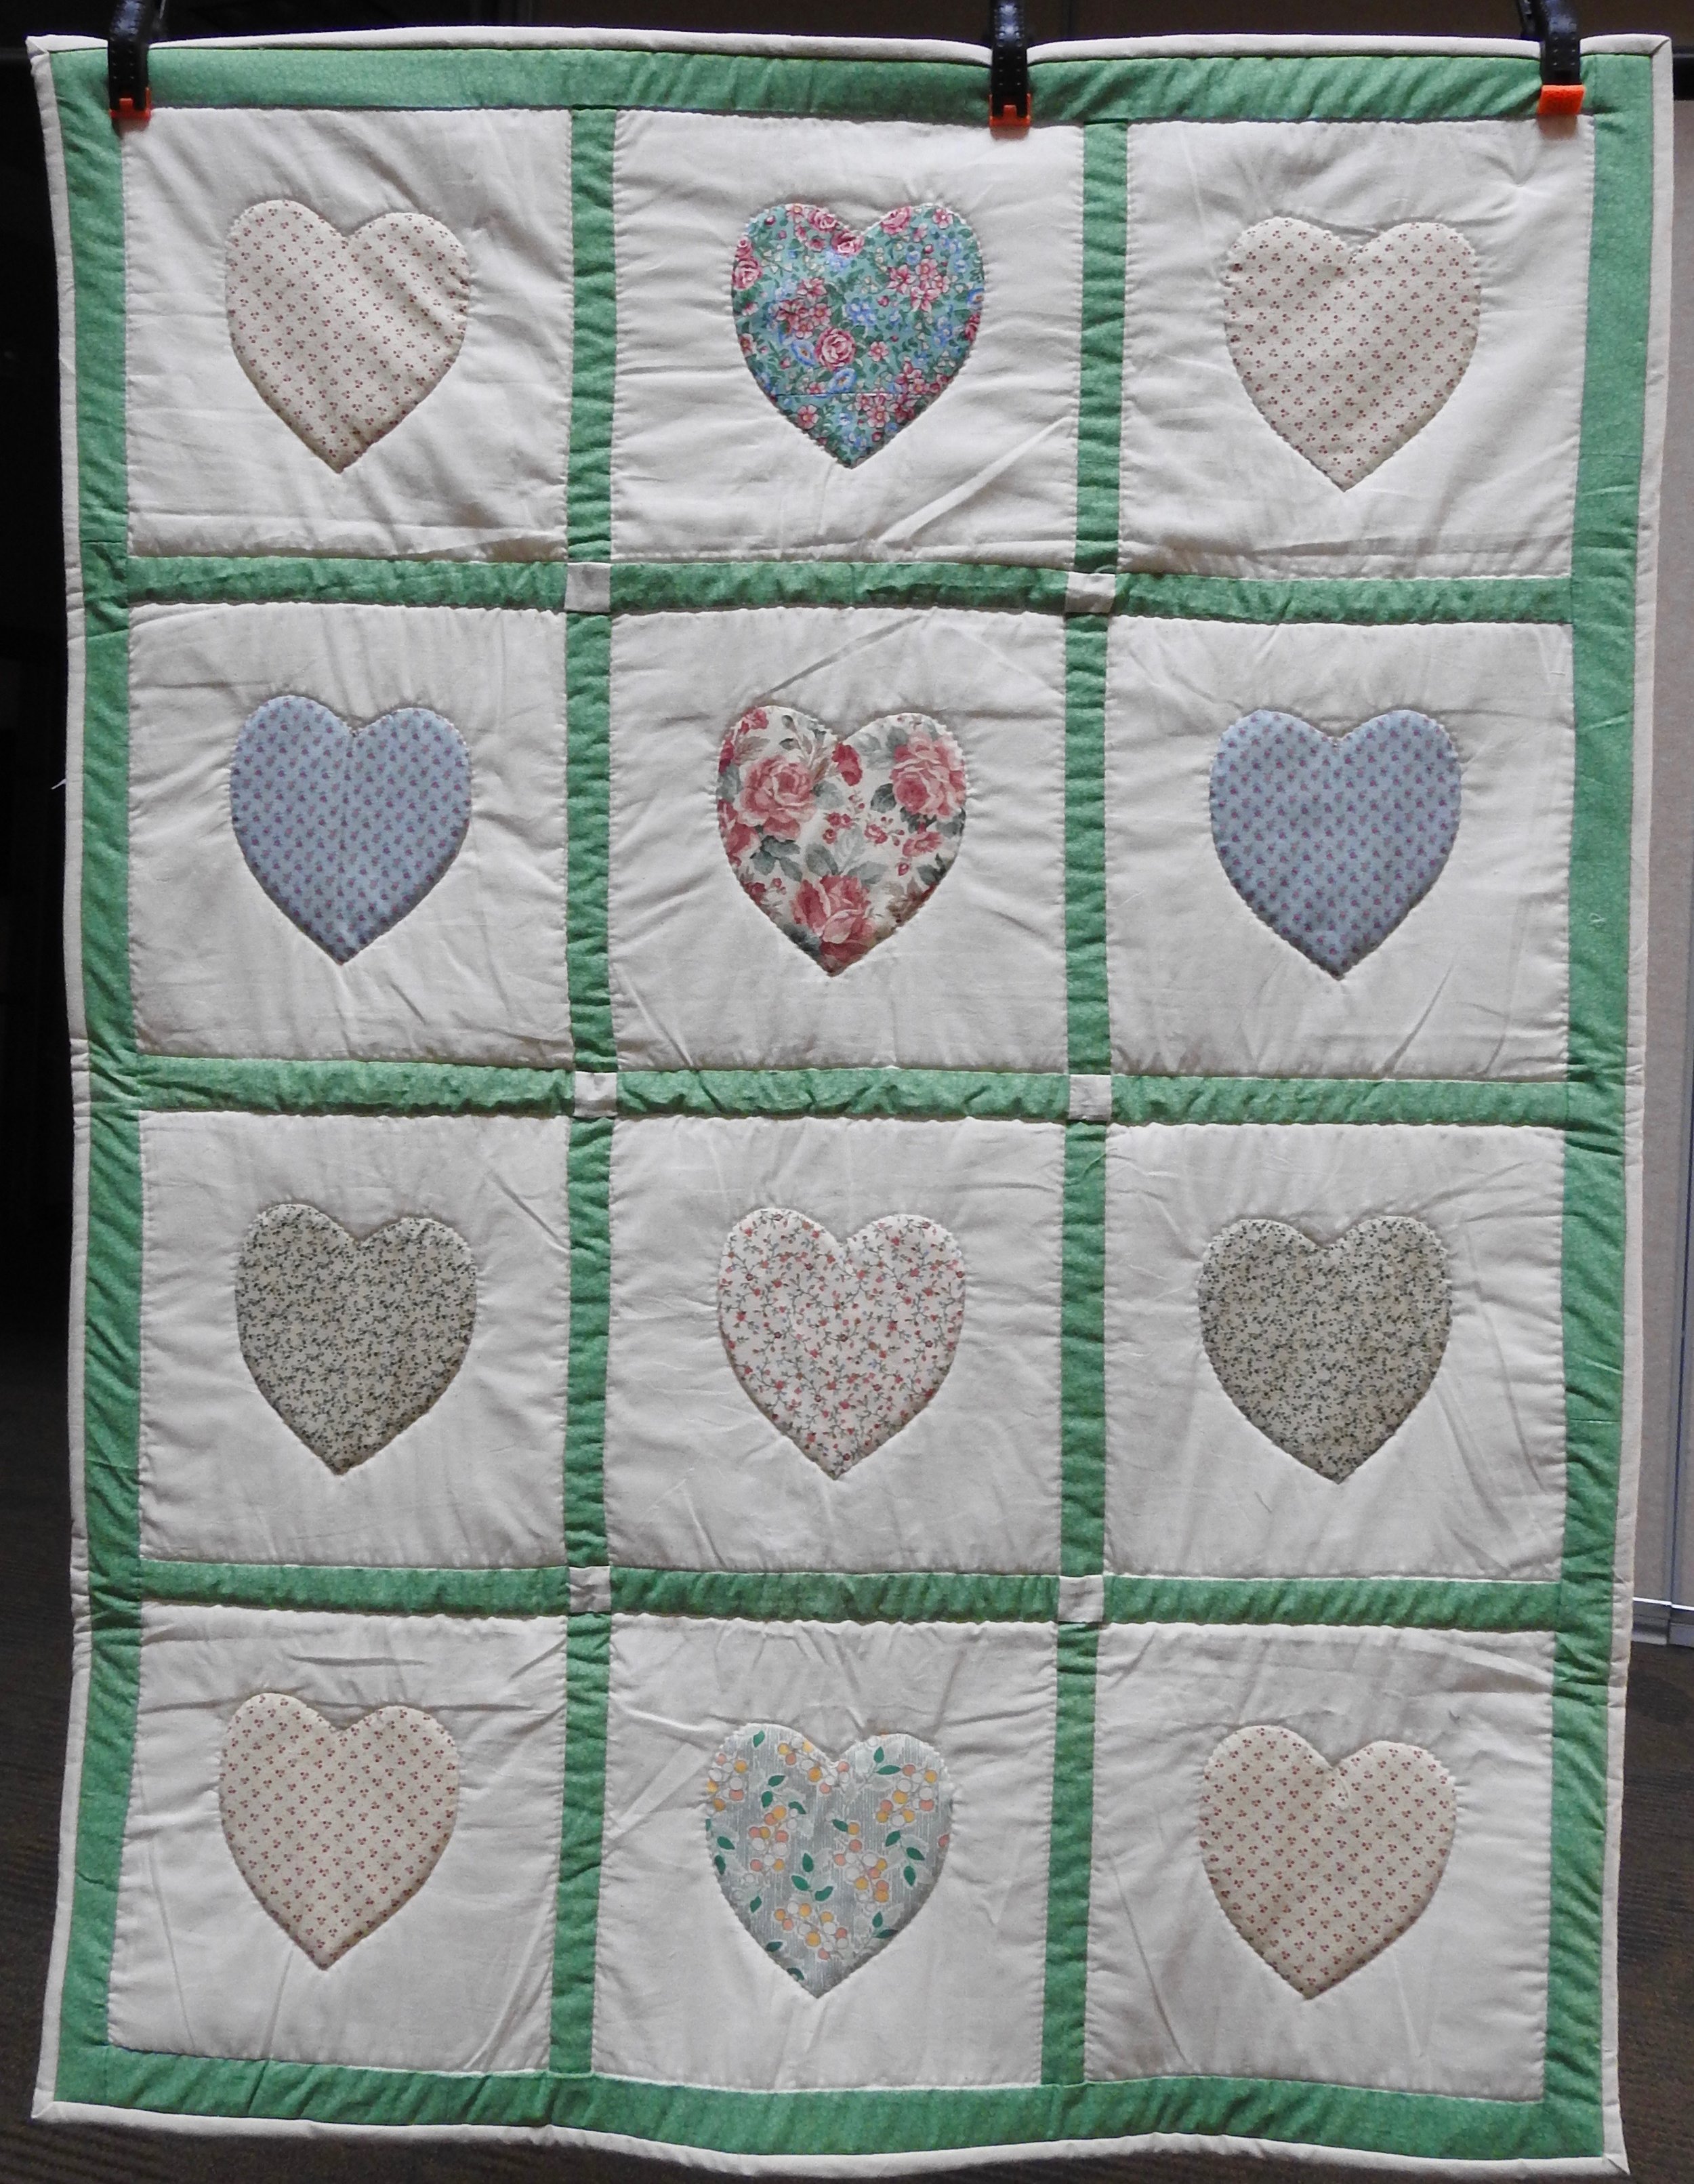 Hearts Baby Quilt, Pieced, Appliquéd and Hand Quilted, Clinton Frame Church, 35 x 45”